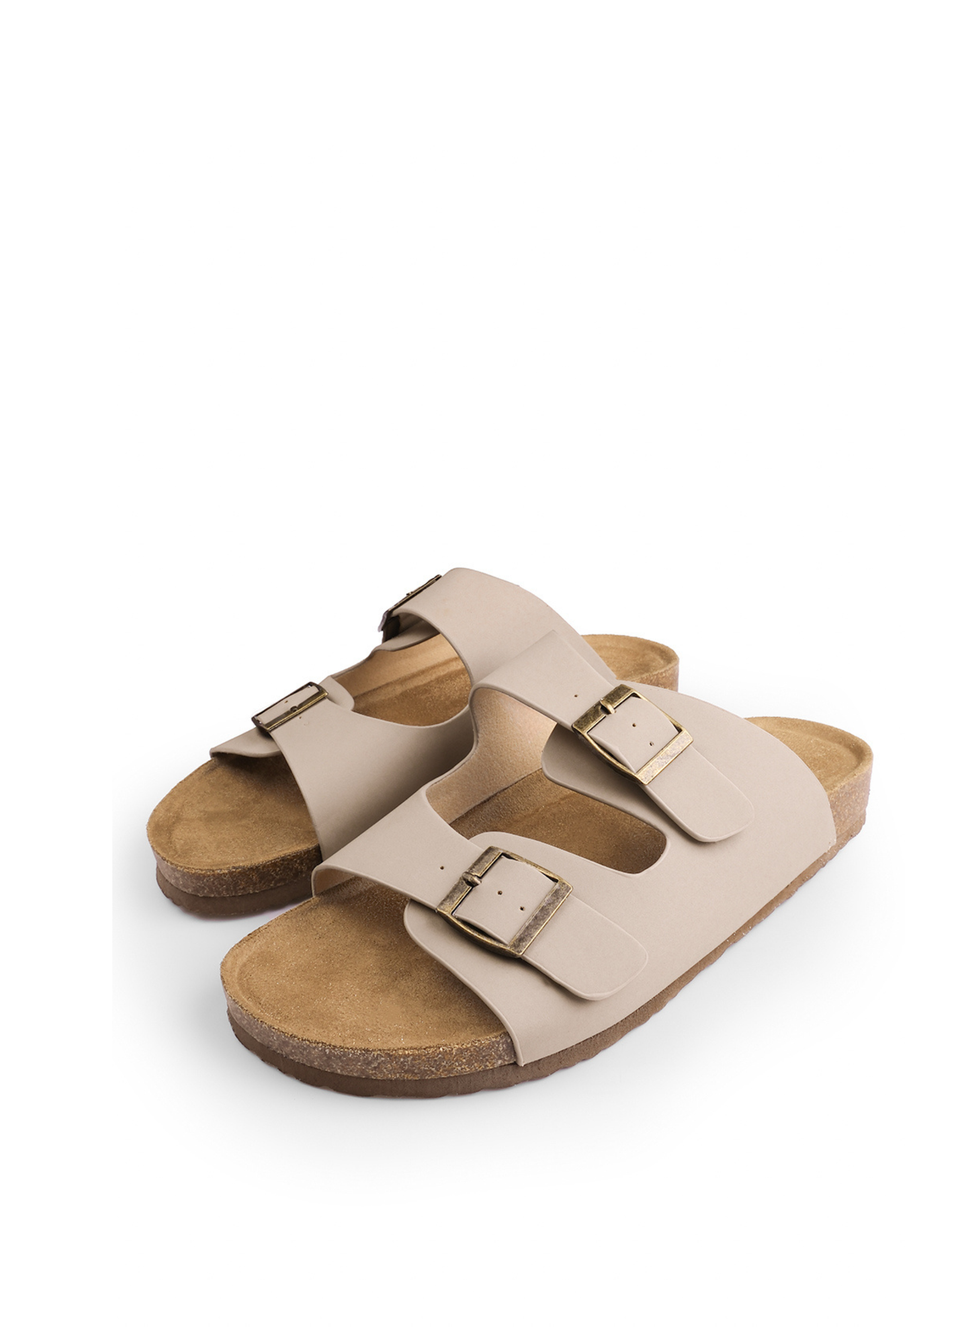 Where's That From Camel Nubuck Willow Flat Sandals